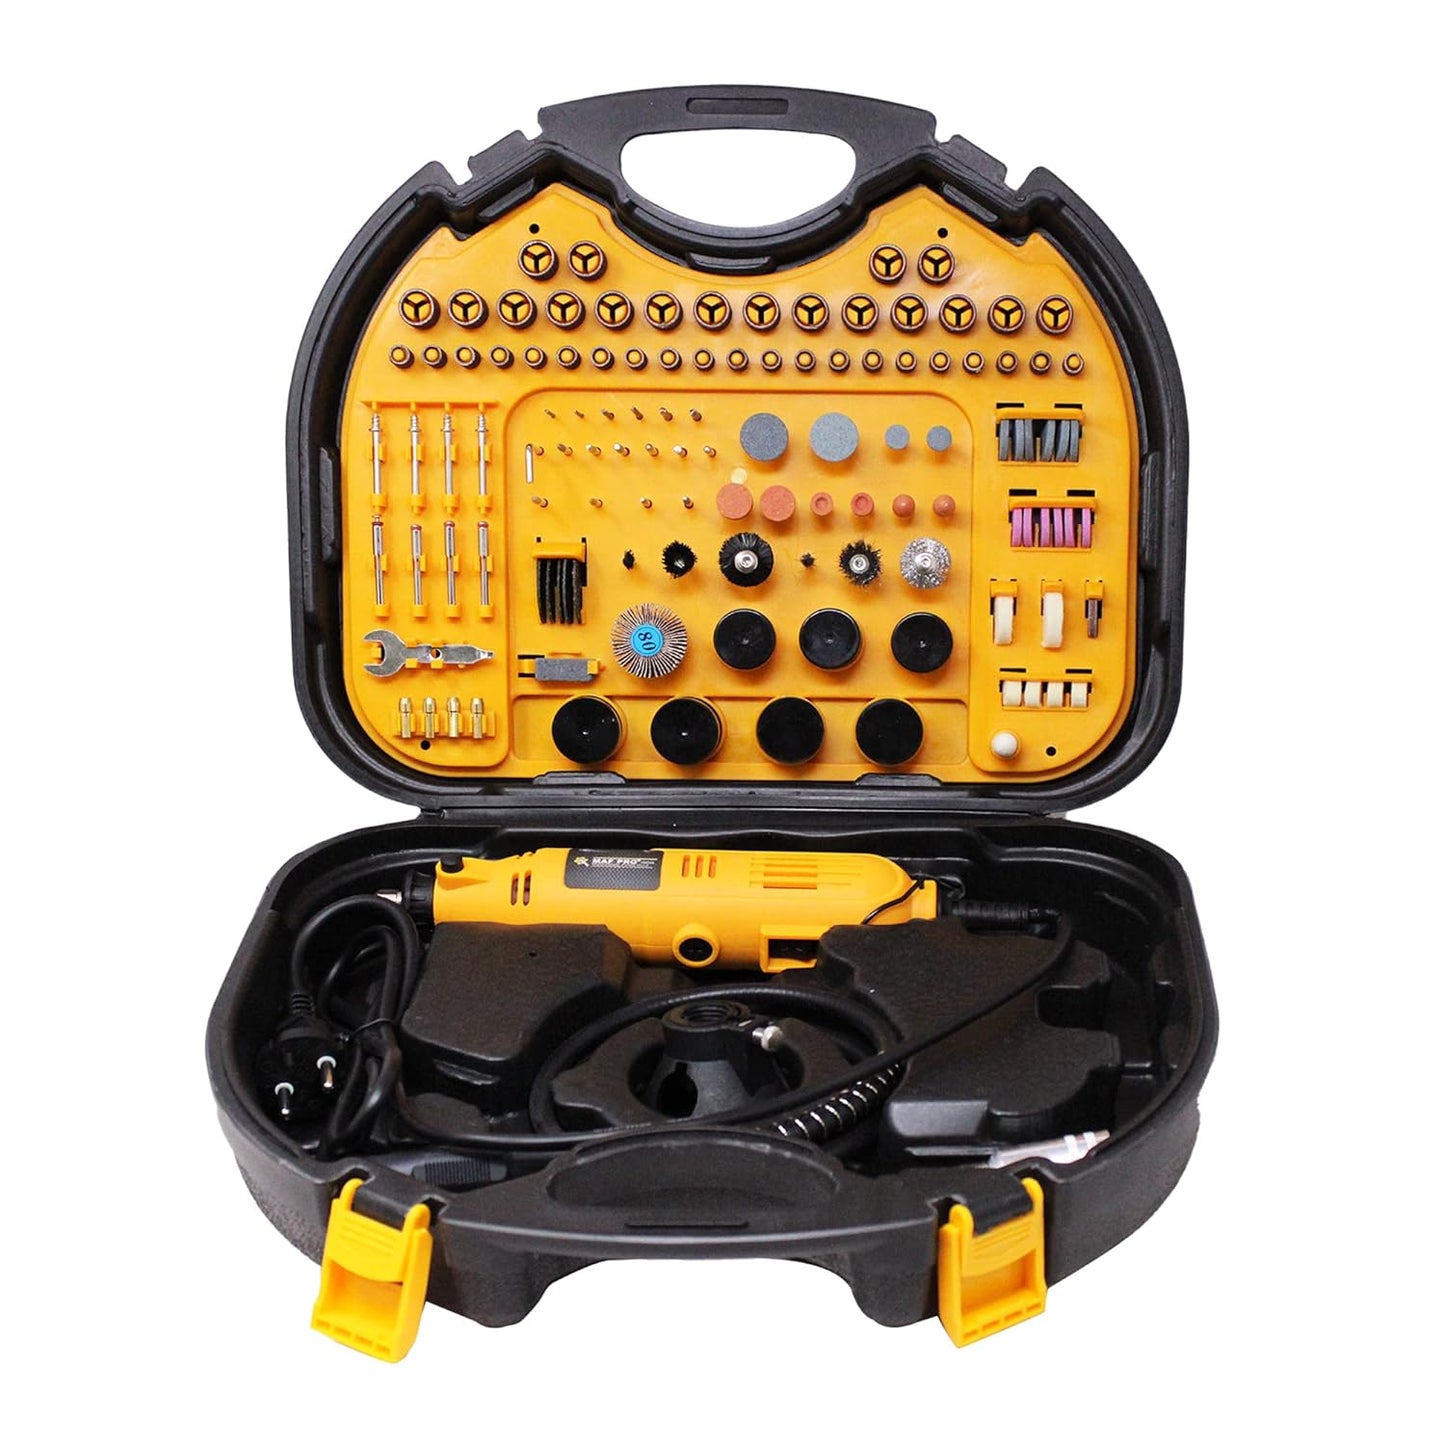 MAF PRO MG2525 Multifunctional Mini Rotary 252 Pieces Die Grinder Kit with Flexible Shaft and Variable Speed for Drilling, Sanding, Buffing, Polishing, Engraving